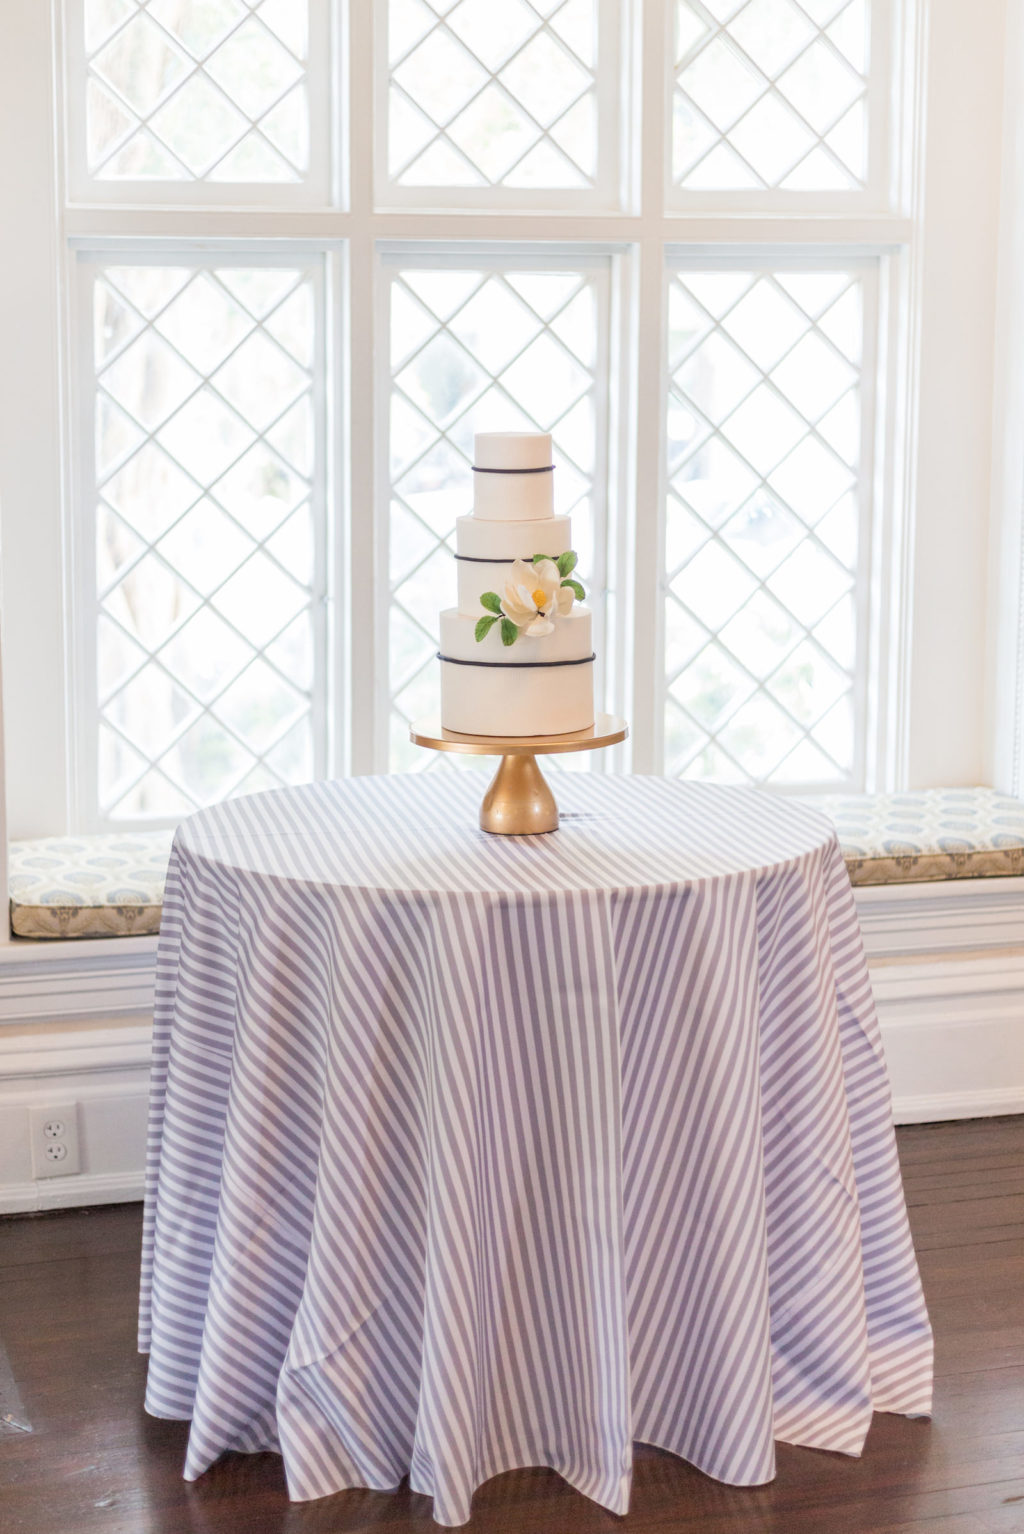 Classic three tier white and blue wedding cake with flower on table with blue striped tablecloth | Tampa Bay wedding planner Elegant Affairs by Design | Tampa Bay Cake Company